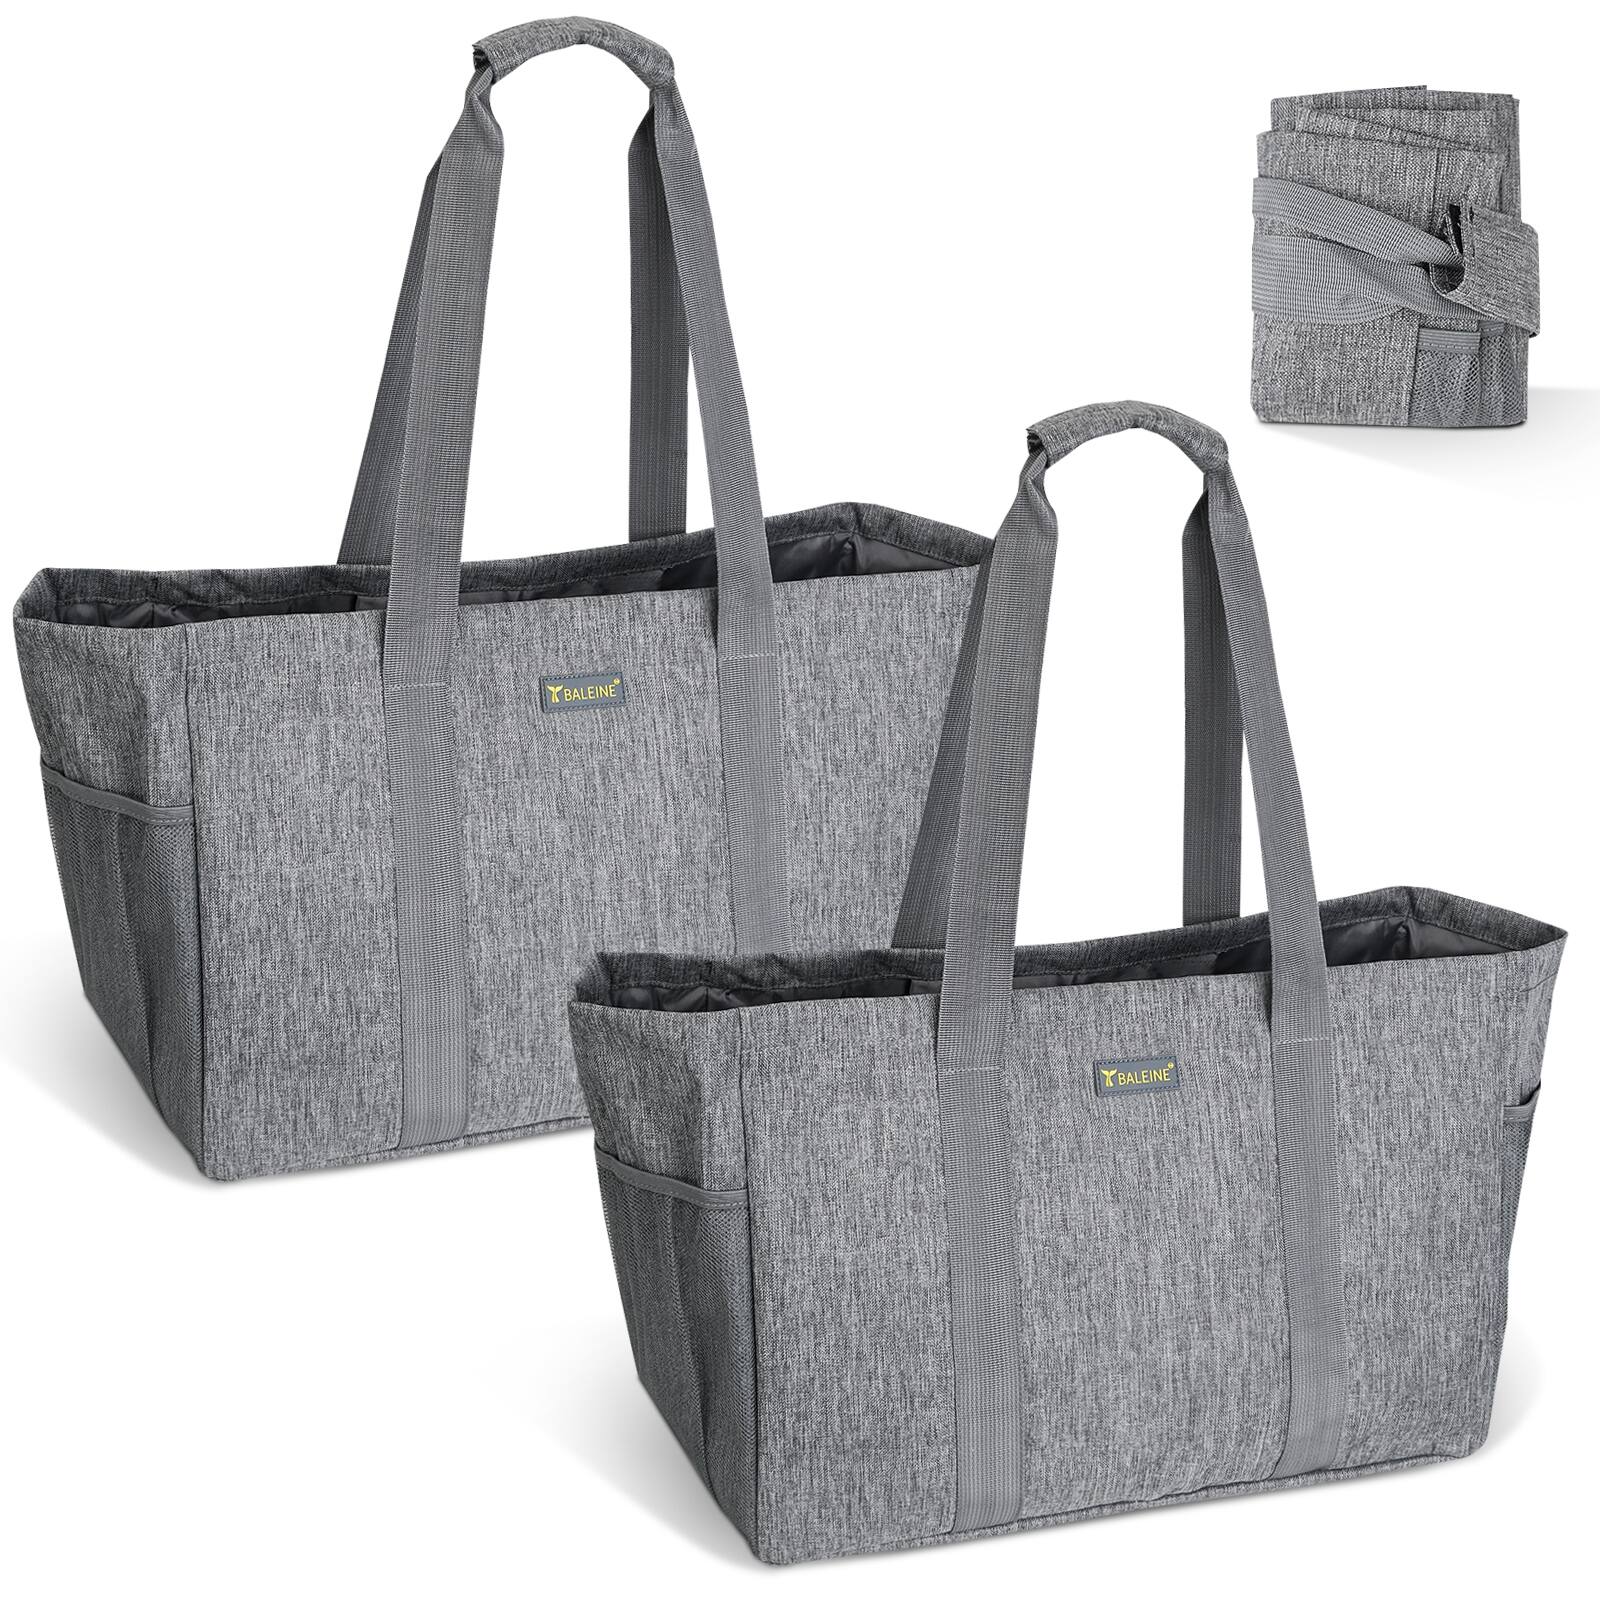 Large Wire & Soft Frame Laundry Tote Bag (1&2 pack, 8 colors) b/w $11.99 - $29.99 + Free Shipping w/ Prime or Orders $25+